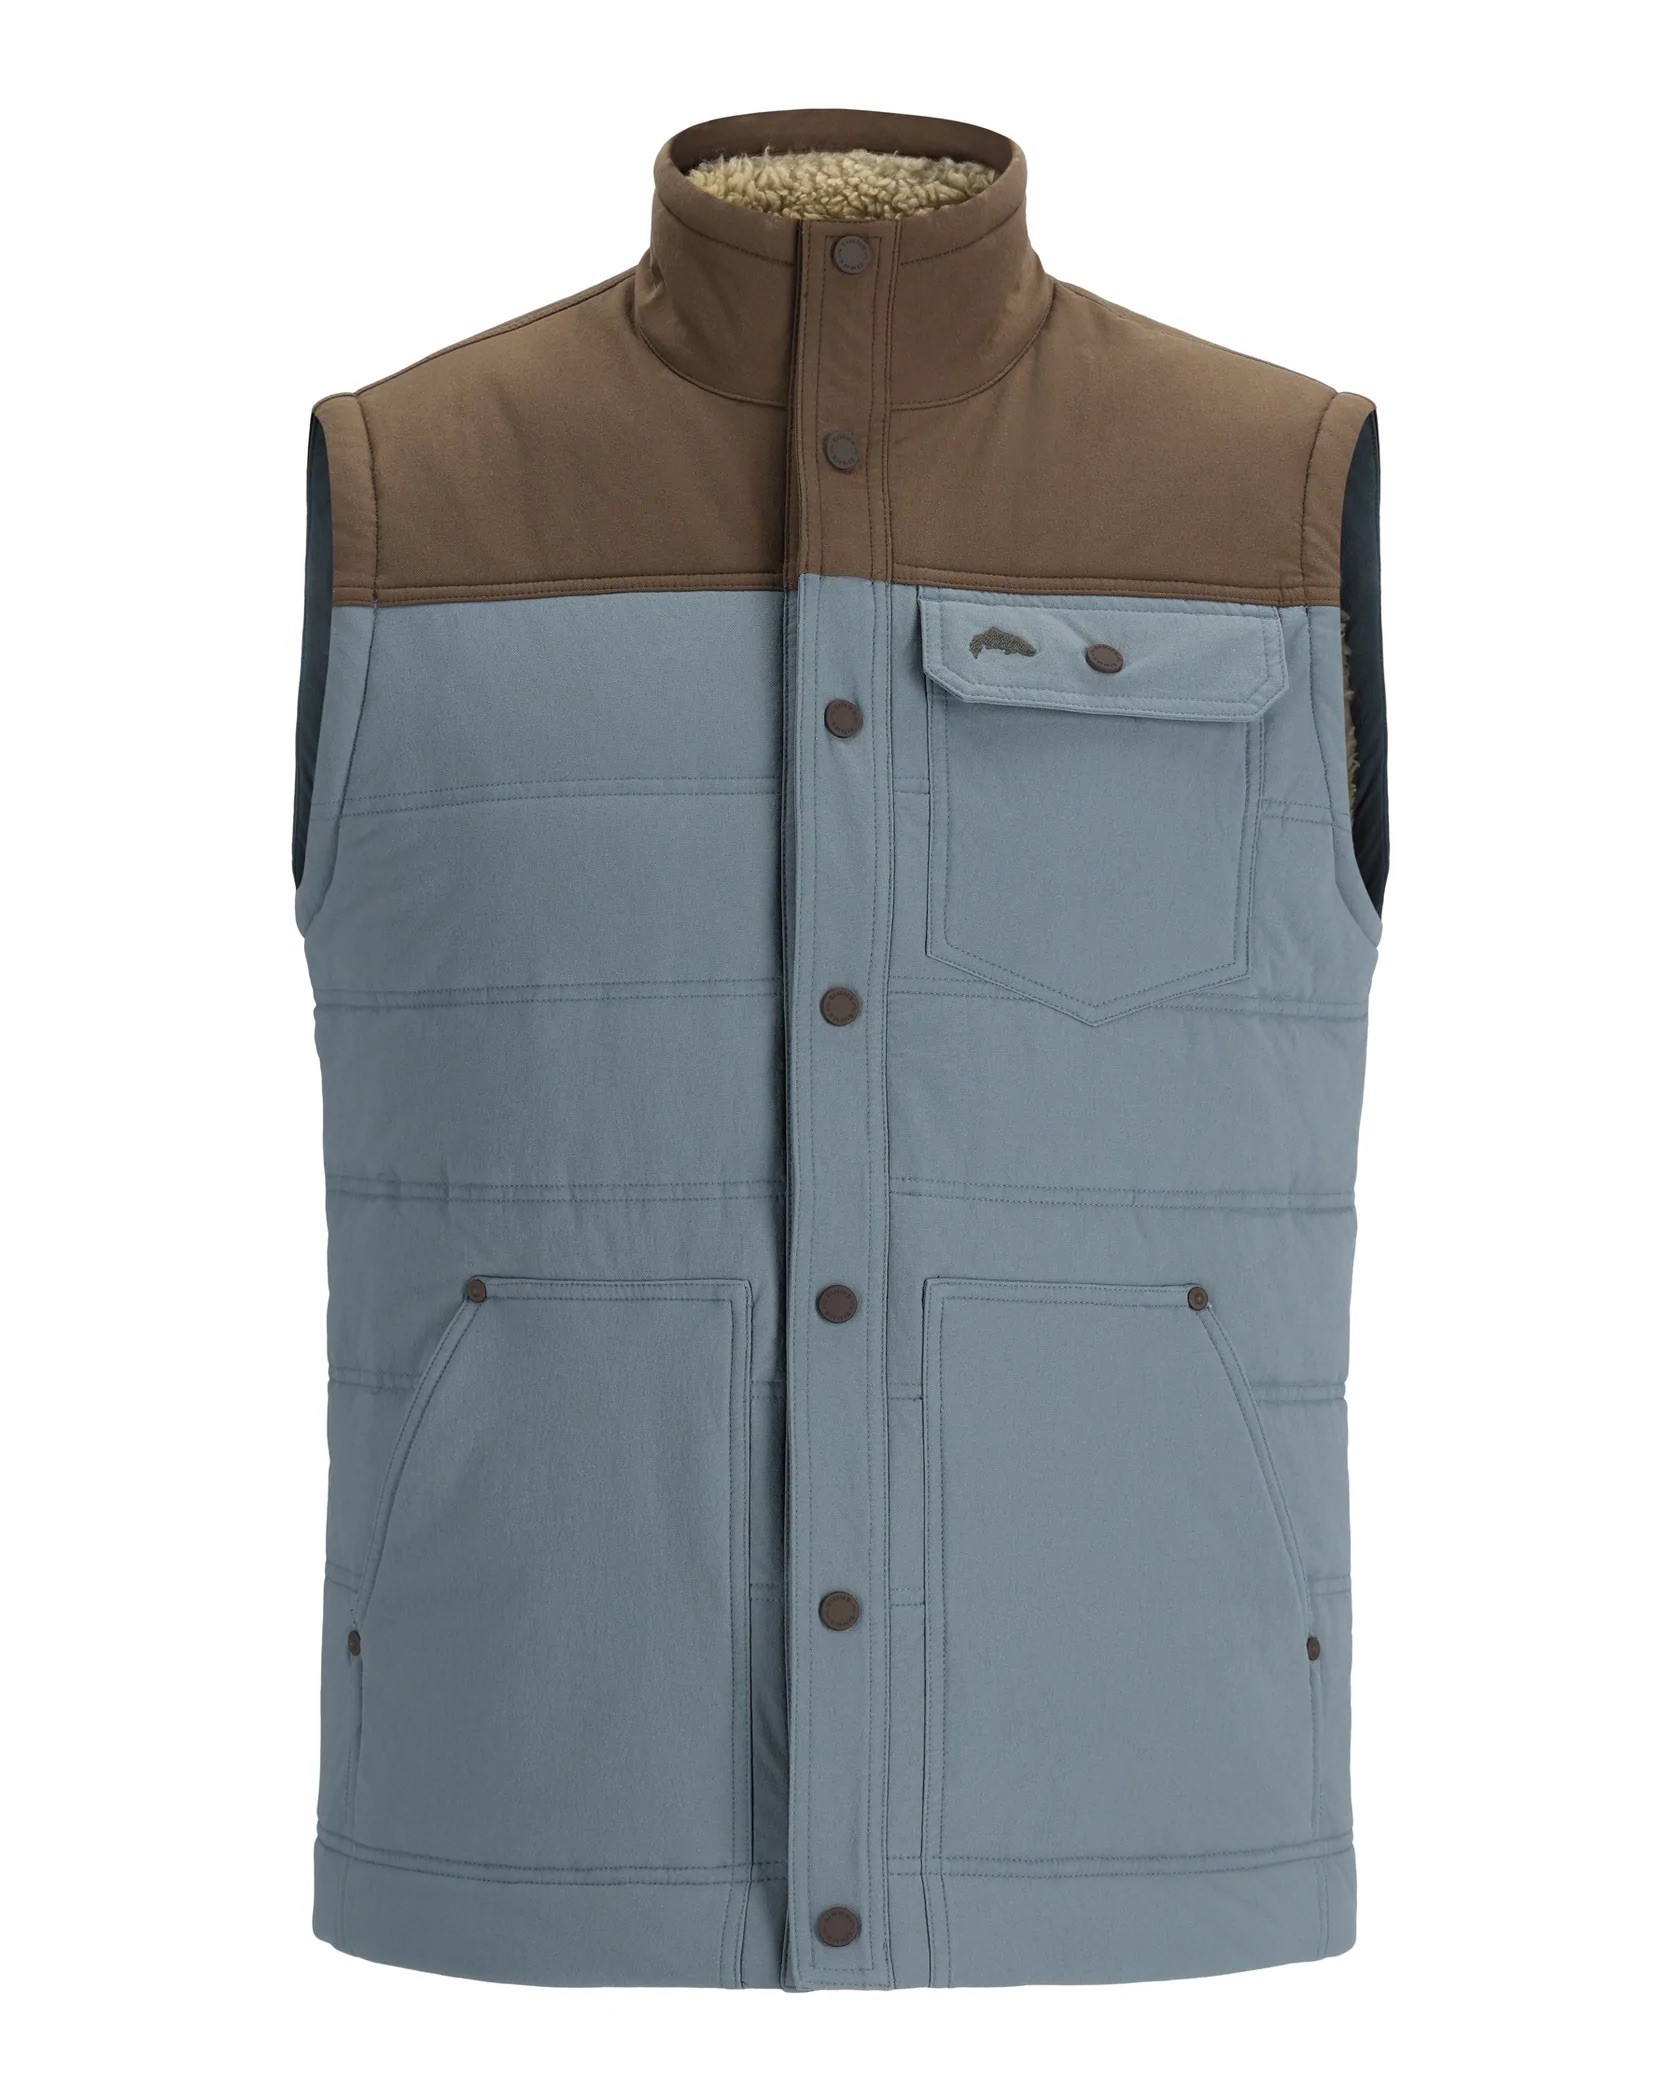 Simms M's Cardwell Vest - Storm/Hickory - XL